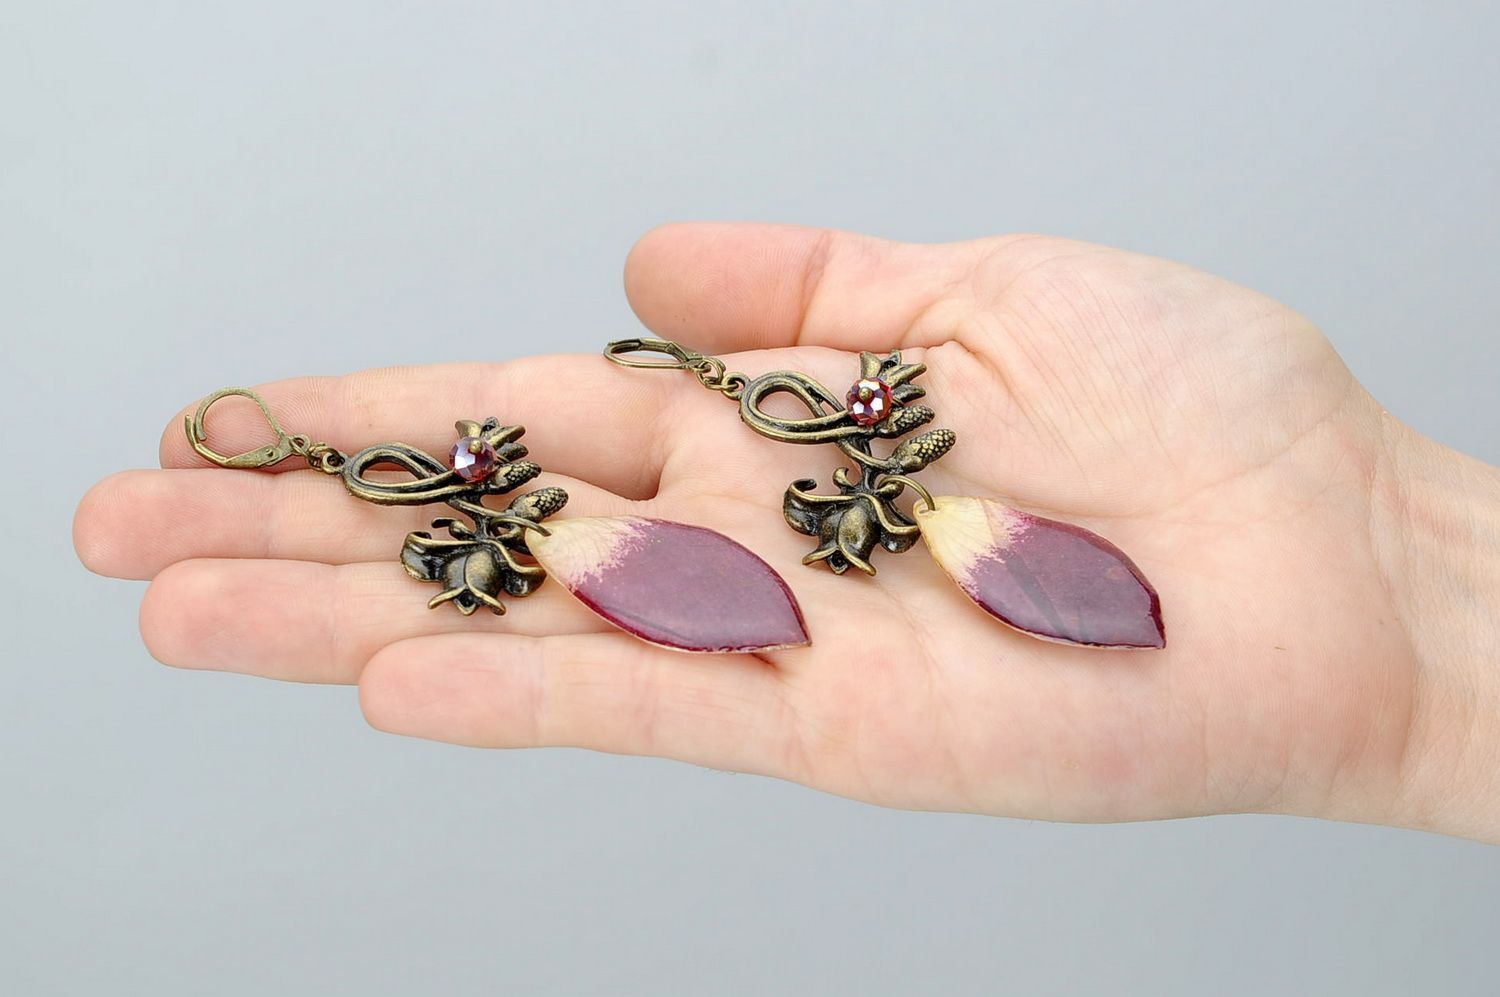 Earrings made from rose petals photo 5